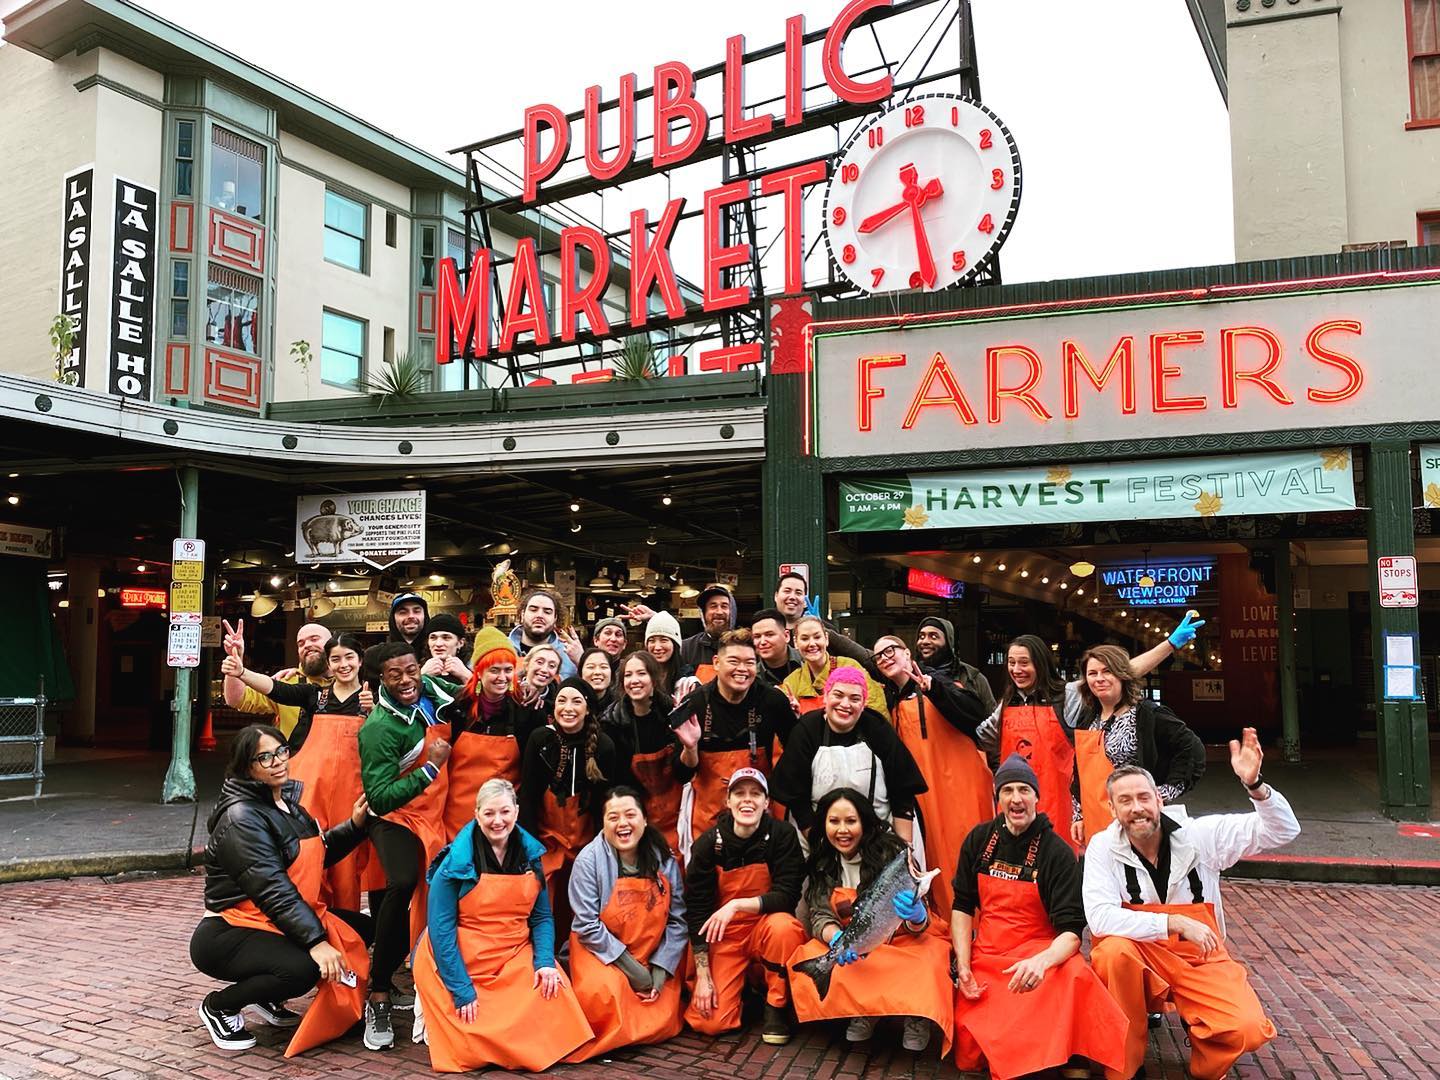 How to See Fish Get Thrown At Pike Place Fish Market